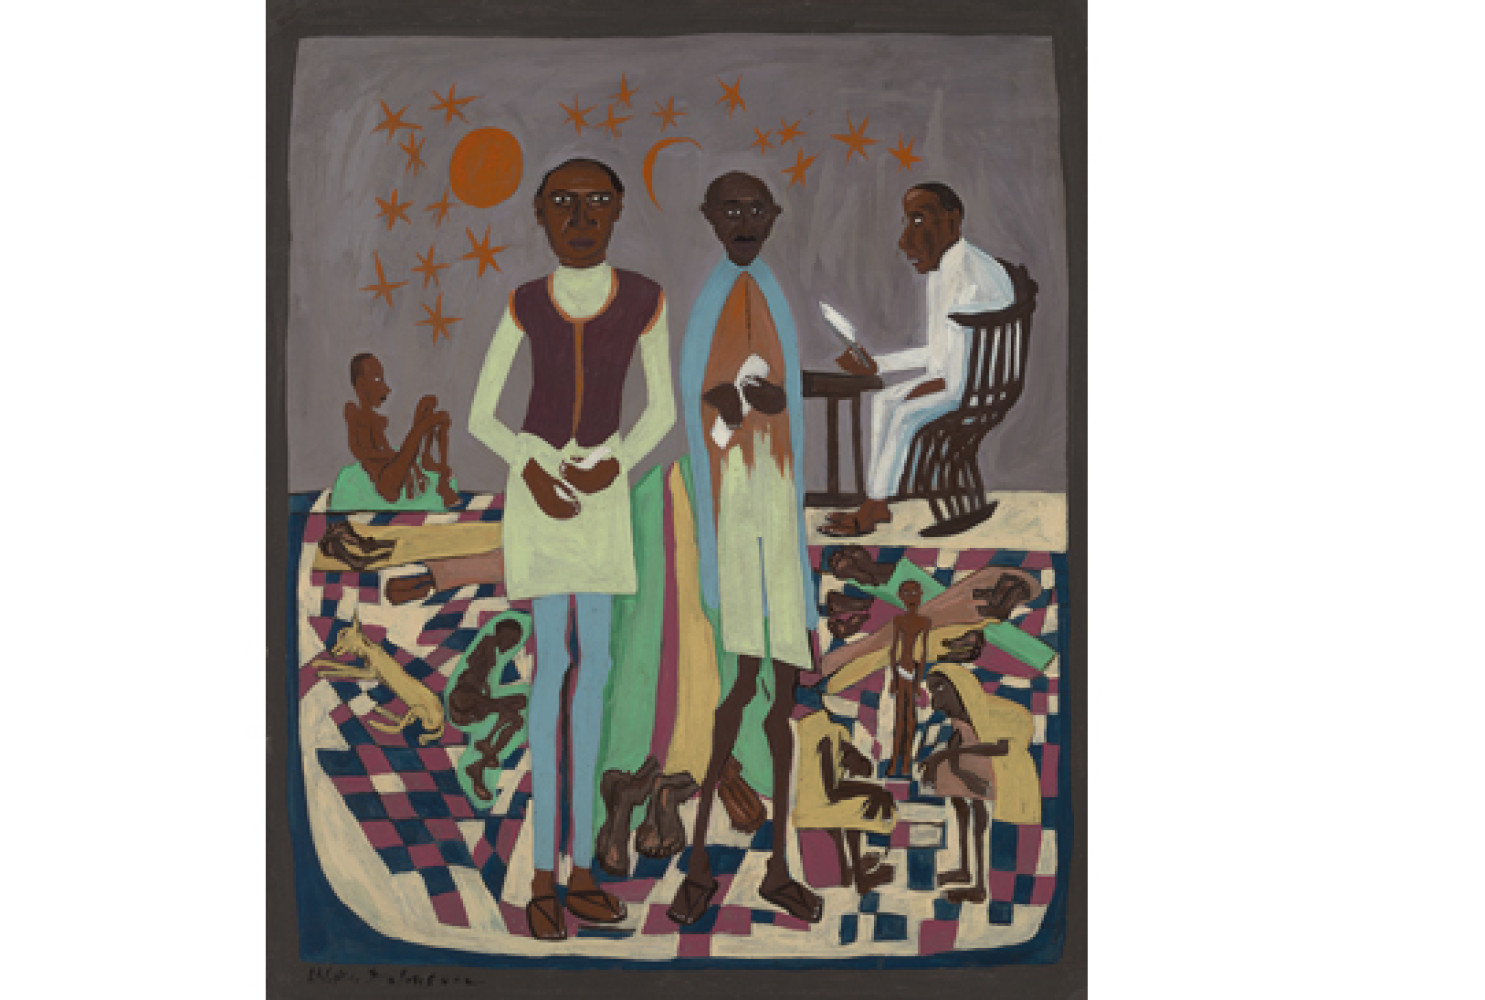 Nehru and Gandhi, ca. 1945, by William H. Johnson (American, 1901-1970). Oil on paperboard, 33 7/8 x 27 7/8 inches. Image courtesy of Smithsonian American Art Museum.